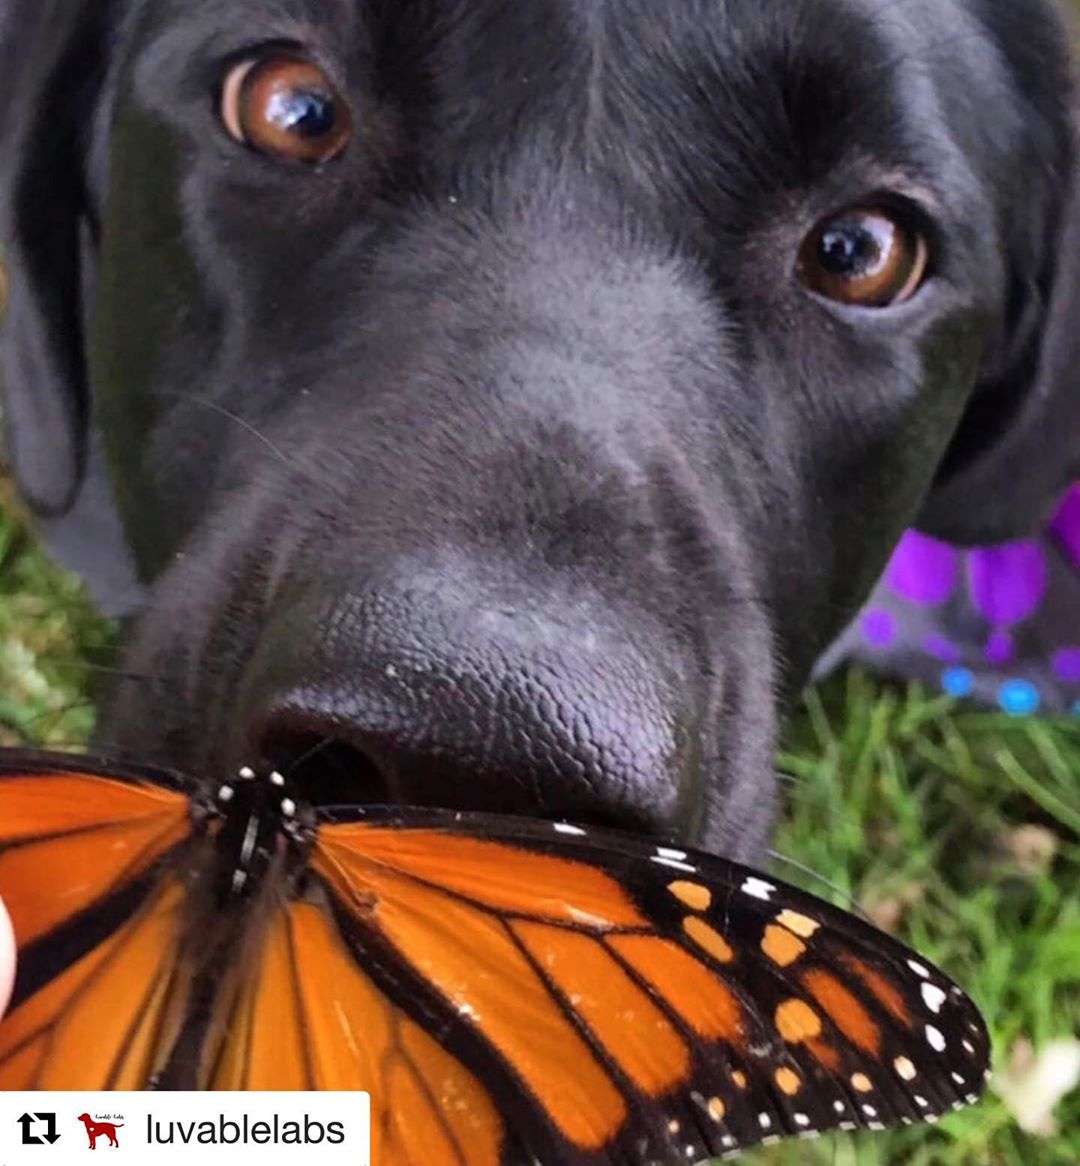 There are no words @luvablelabs with @get_repost
・・・
“If nothing ever changed, there’d be no butterflies” 🦋
———————————
Thank you @misty_luna_ for being a luvable lab ❤
.
Stay pawesome